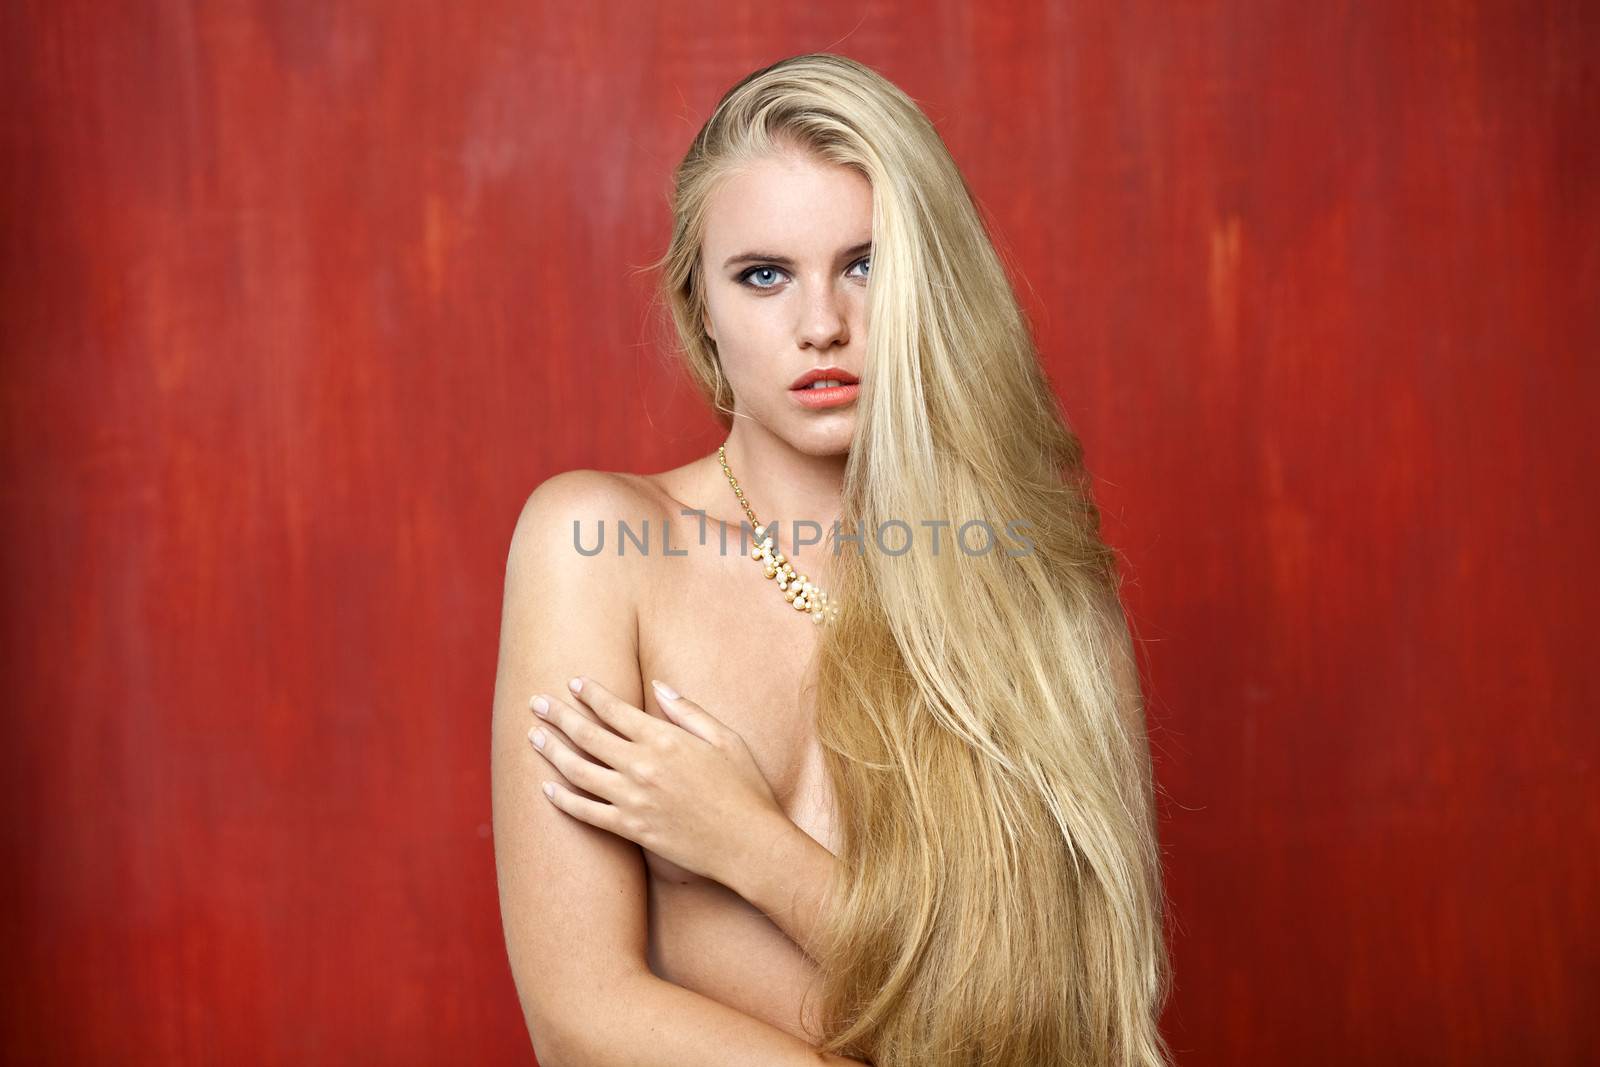 Sexy nude model on red wall studio